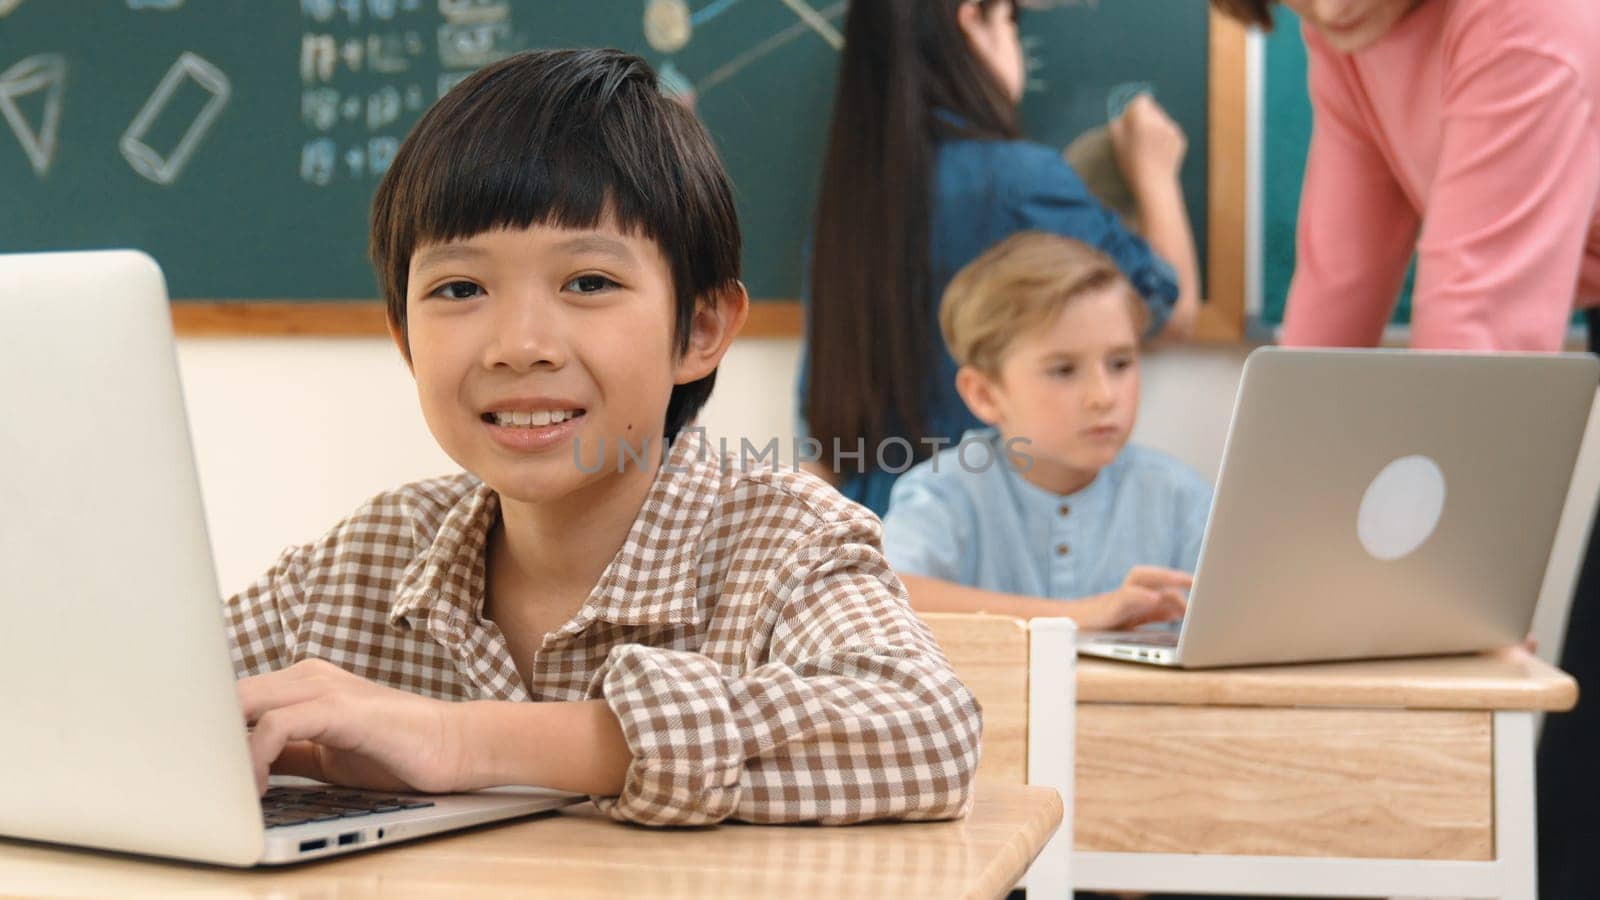 Cute boy coding engineering prompt while attractive girl drawing picture at blackboard. Caucasian boy asking teacher a question about programing software system to generate AI at STEM class. Pedagogy.